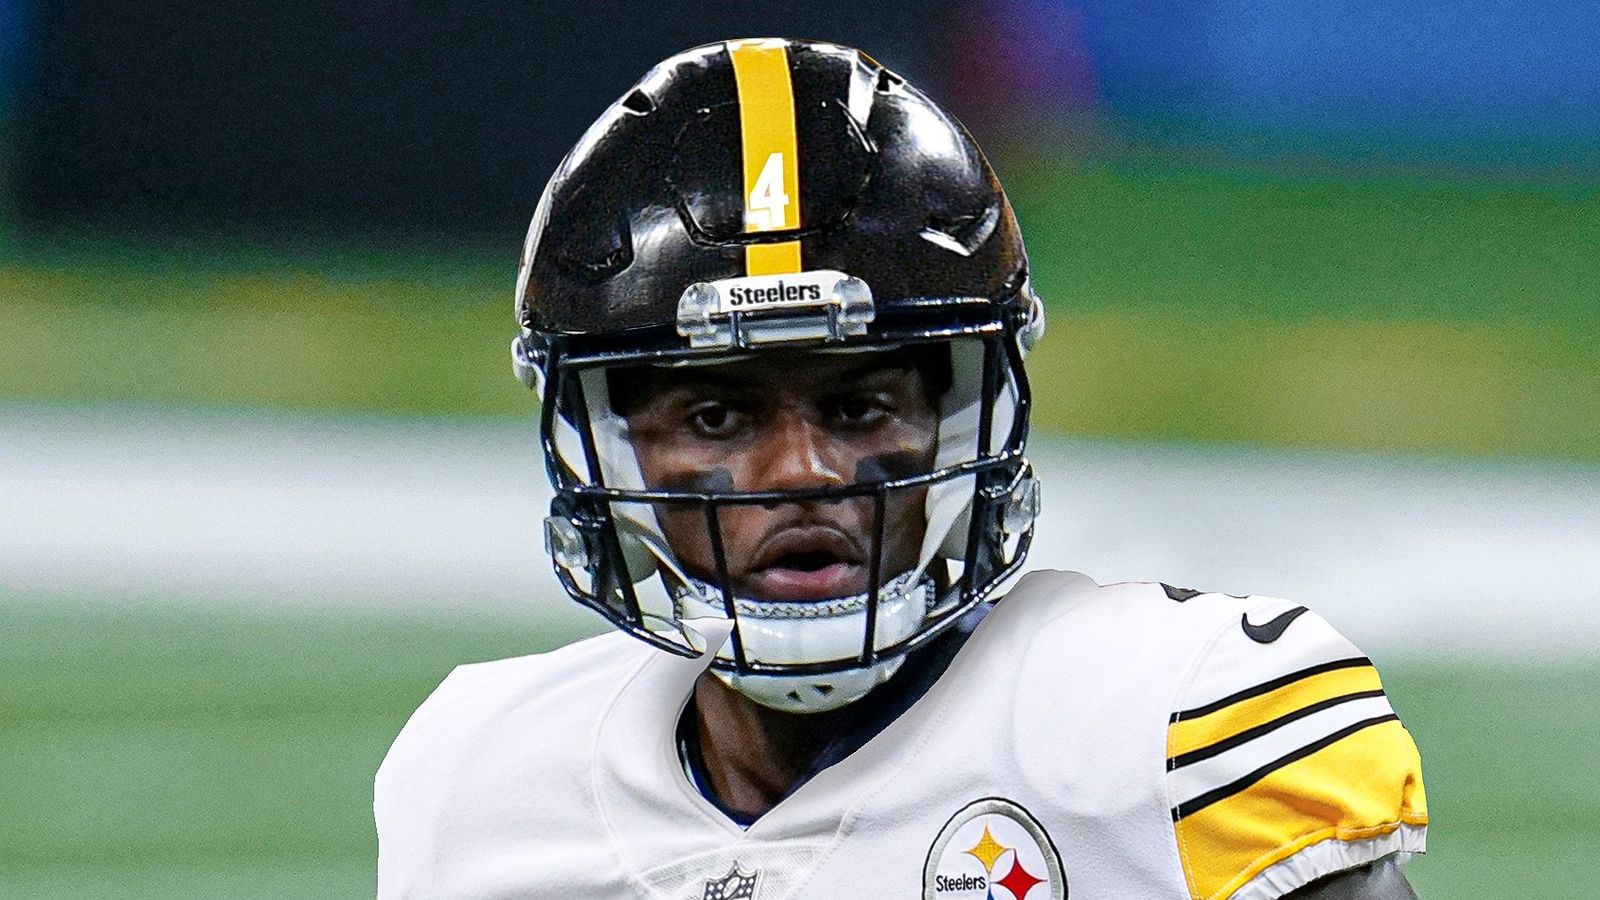 No Rodgers. No Wilson. What now for the Steelers?